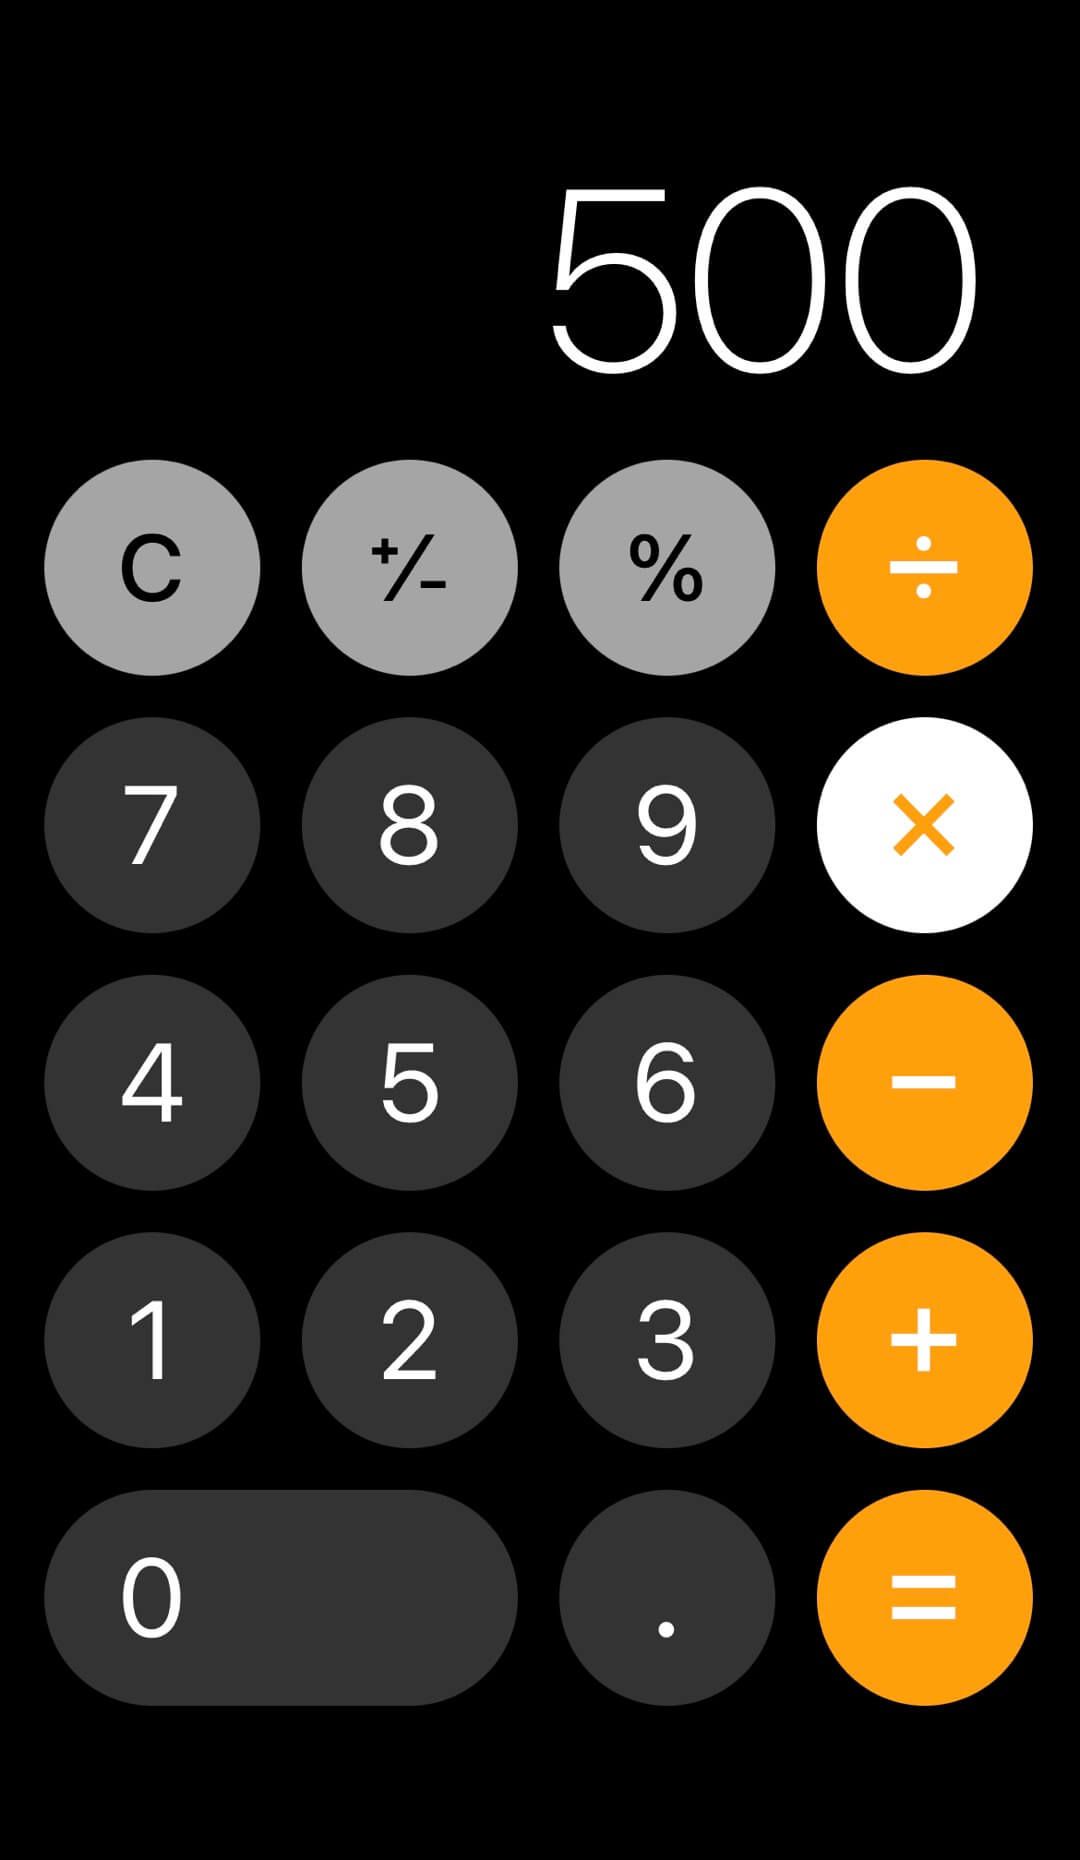 $500 on iPhone calculator for move expense.